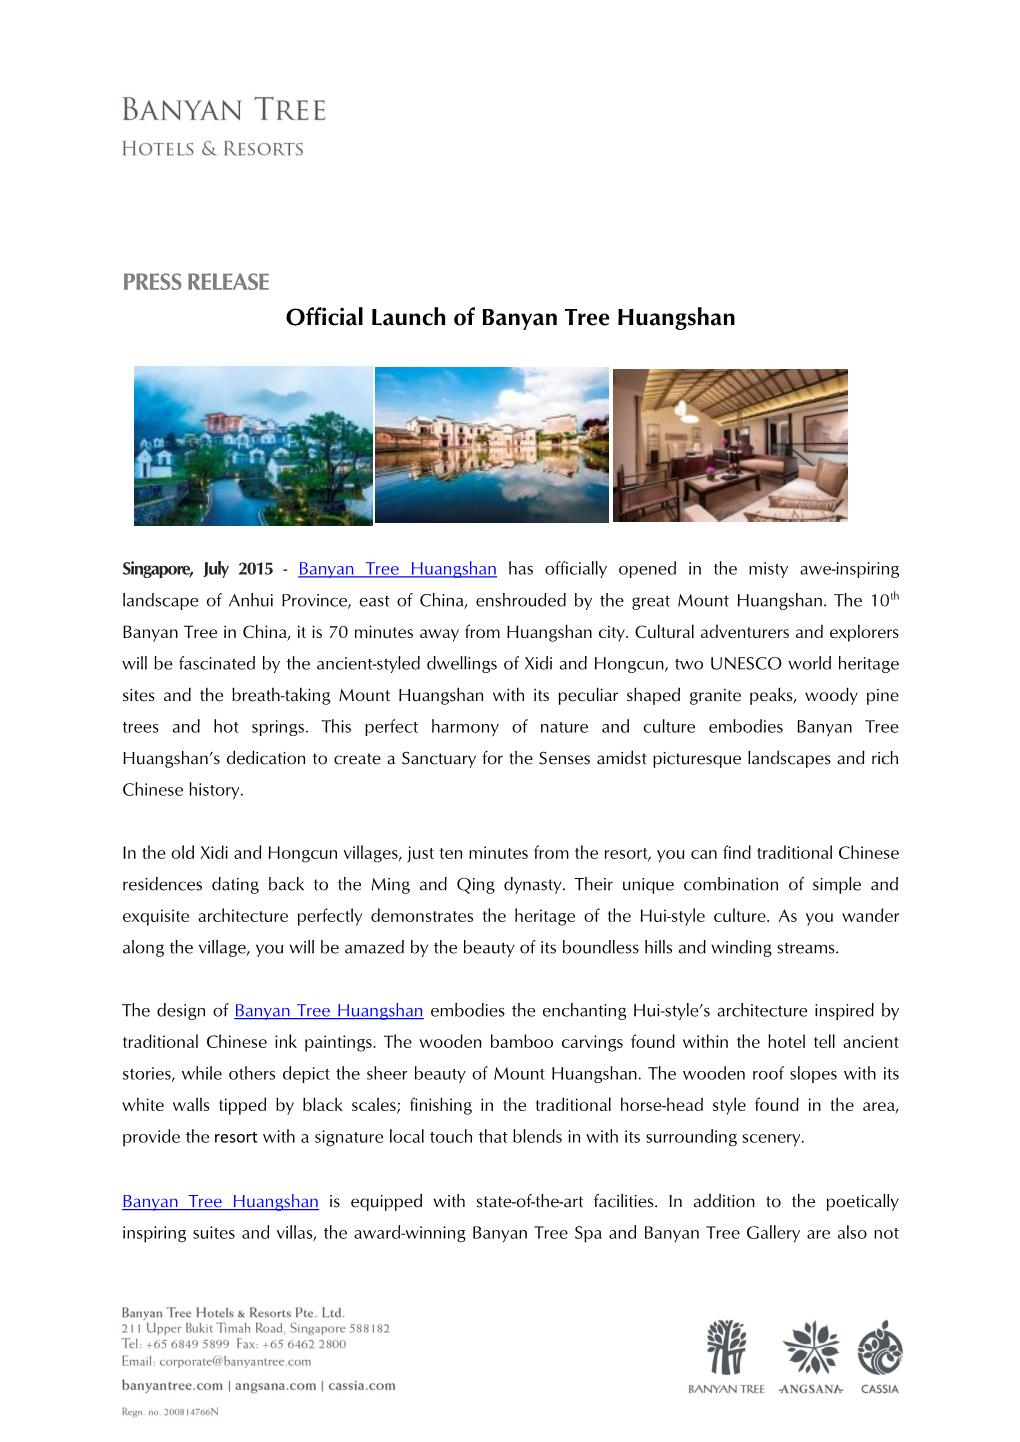 PRESS RELEASE Official Launch of Banyan Tree Huangshan